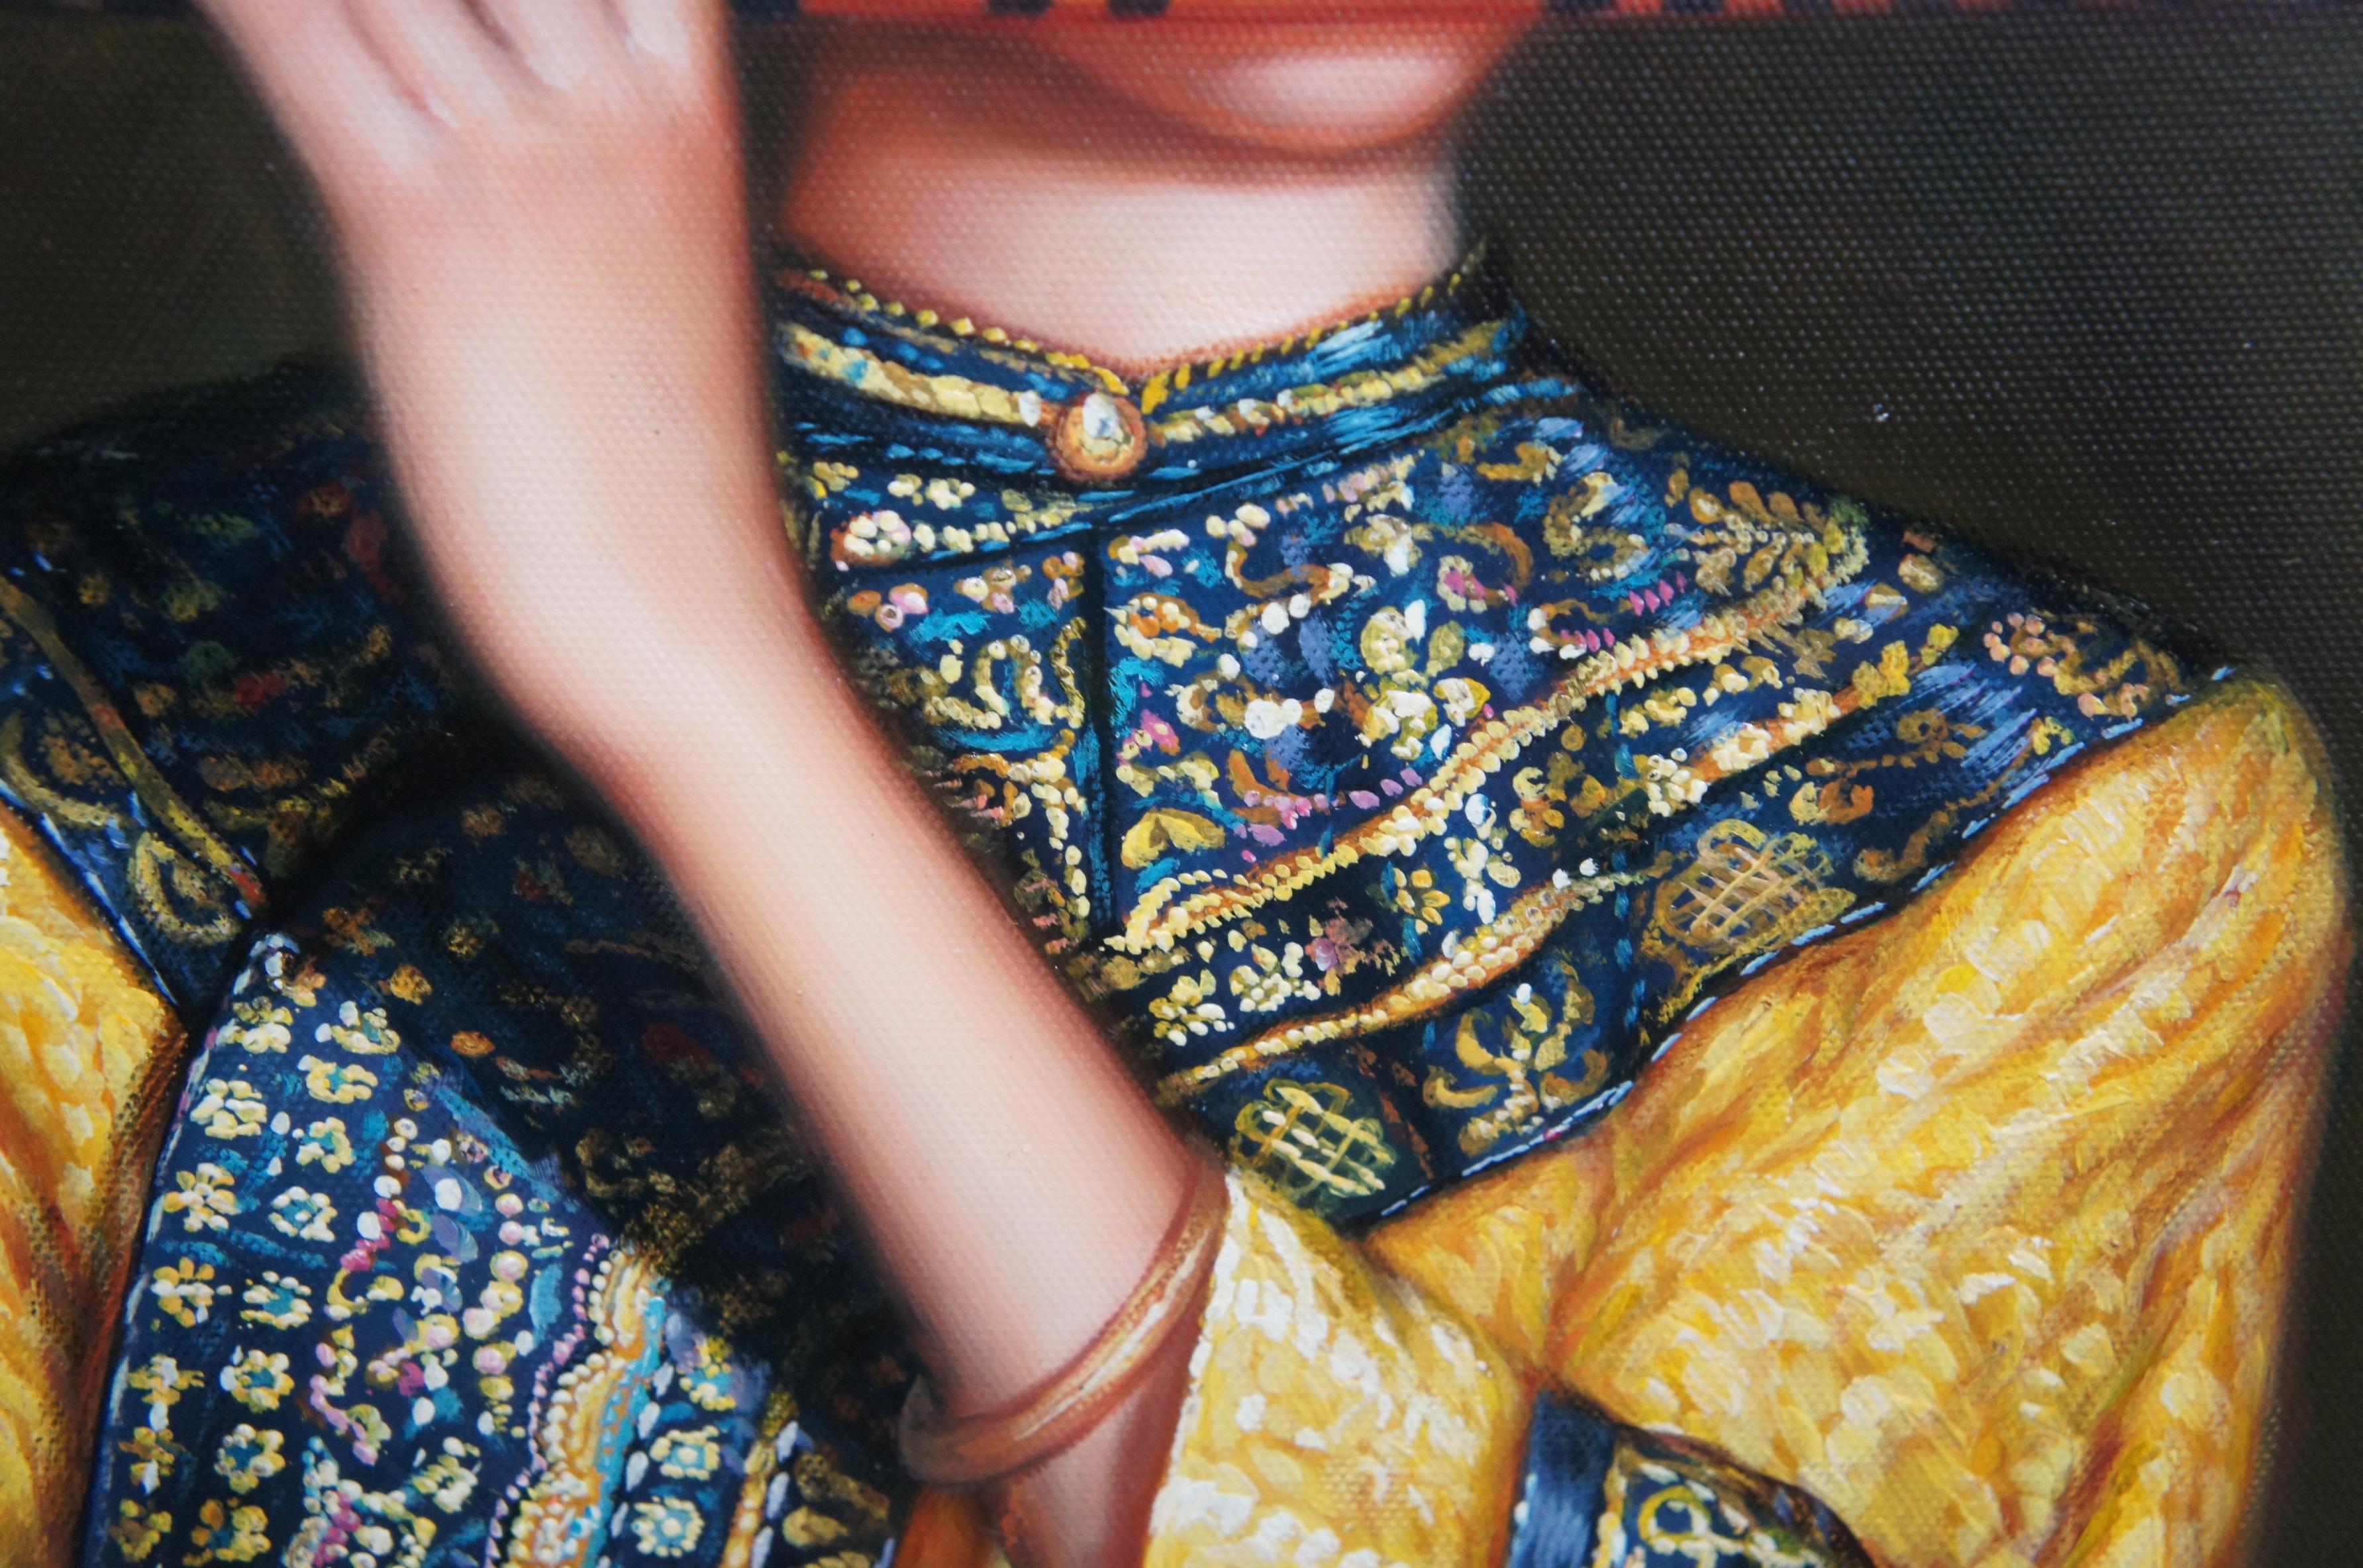 Chinese Woman Playing Bamboo Flute Oil Painting on Canvas After Chen Yifei 47